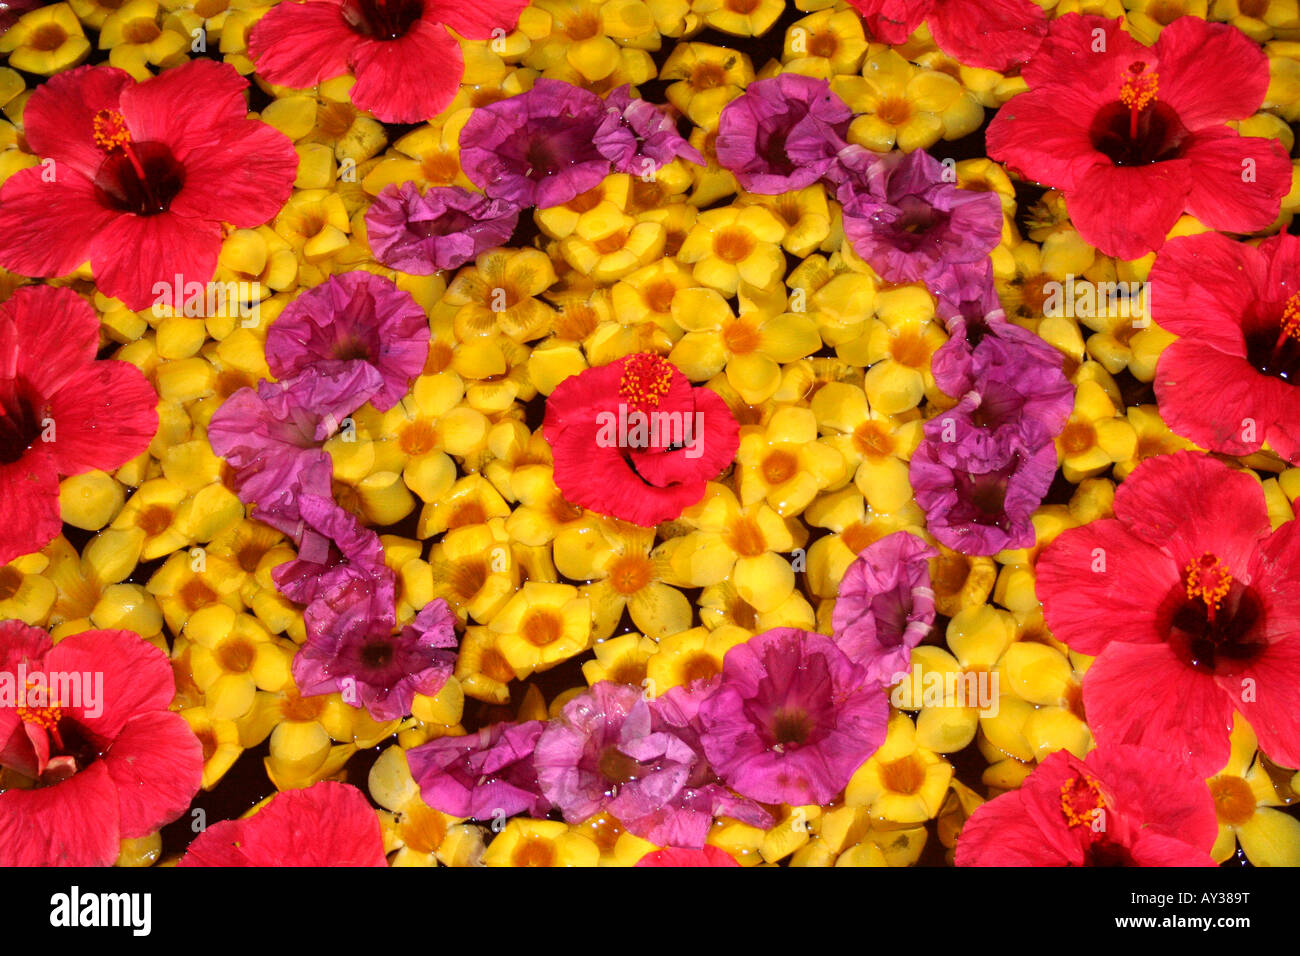 Flowers arranged in a pattern known as athapoo or atthapoo, typically associated with onam - harvest festival of kerala india Stock Photo